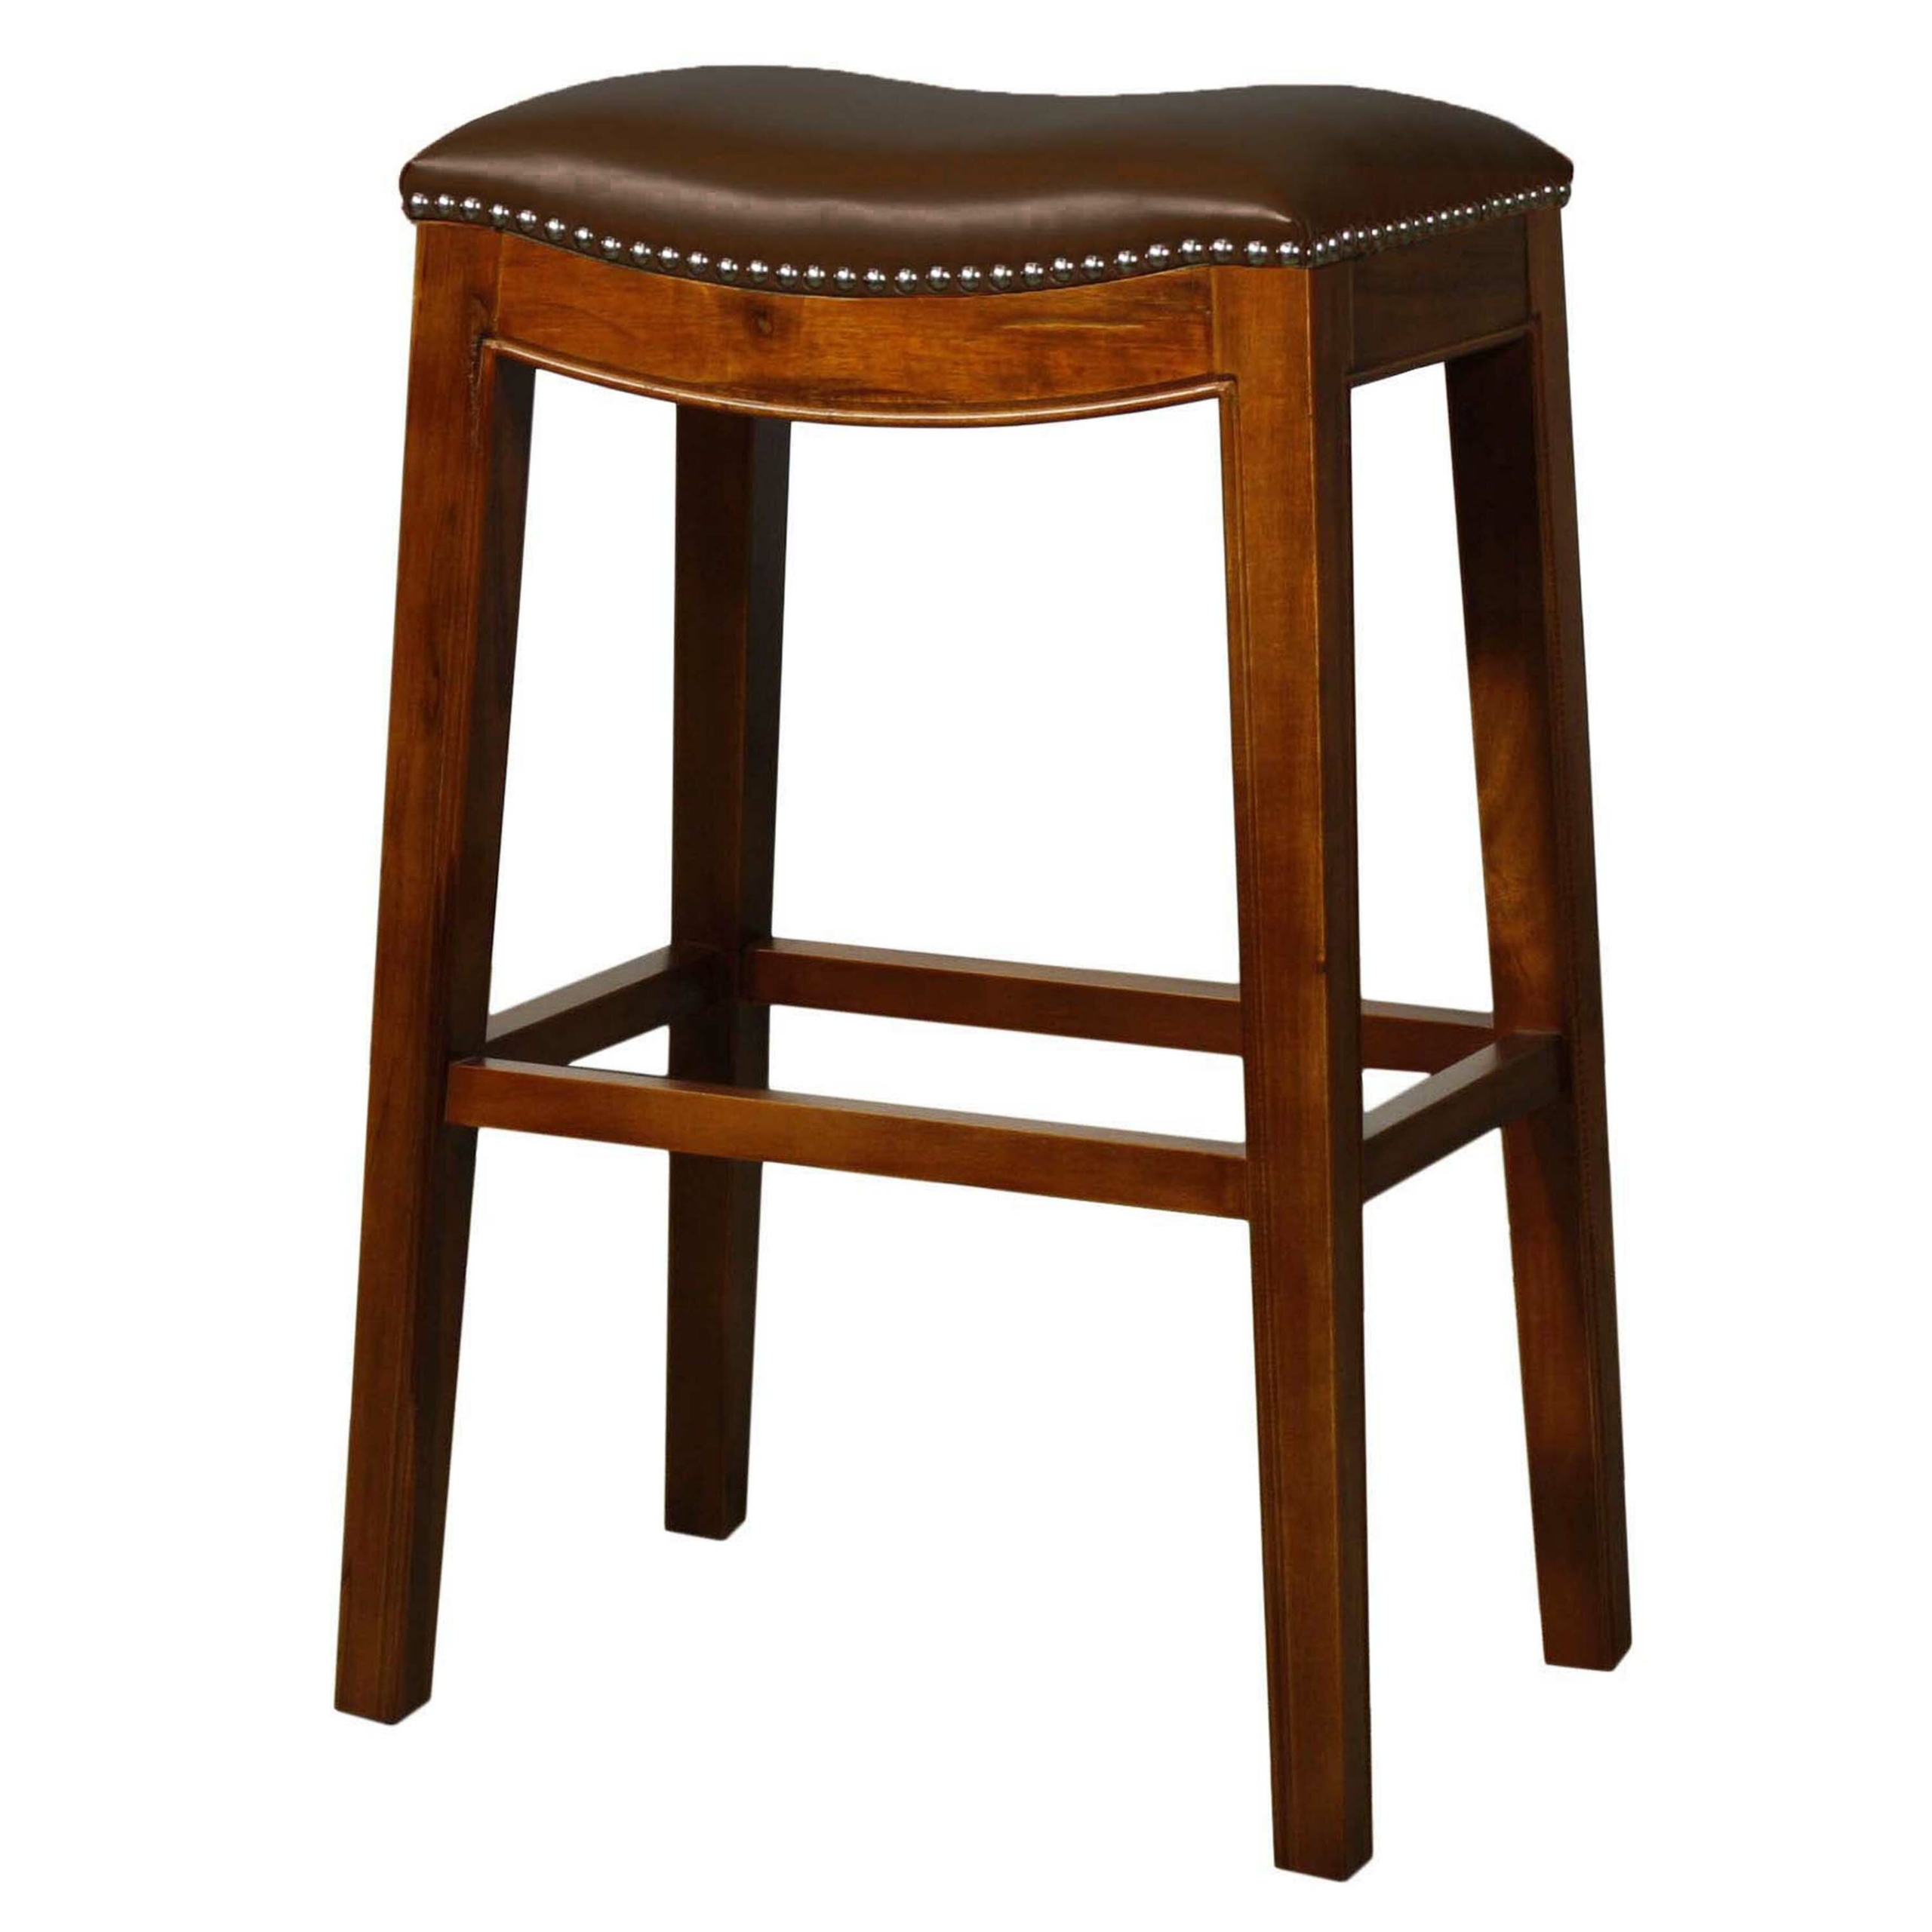 New Counter Stool Saddle Brown Leather Traditional Bar Stools And Counter Stools